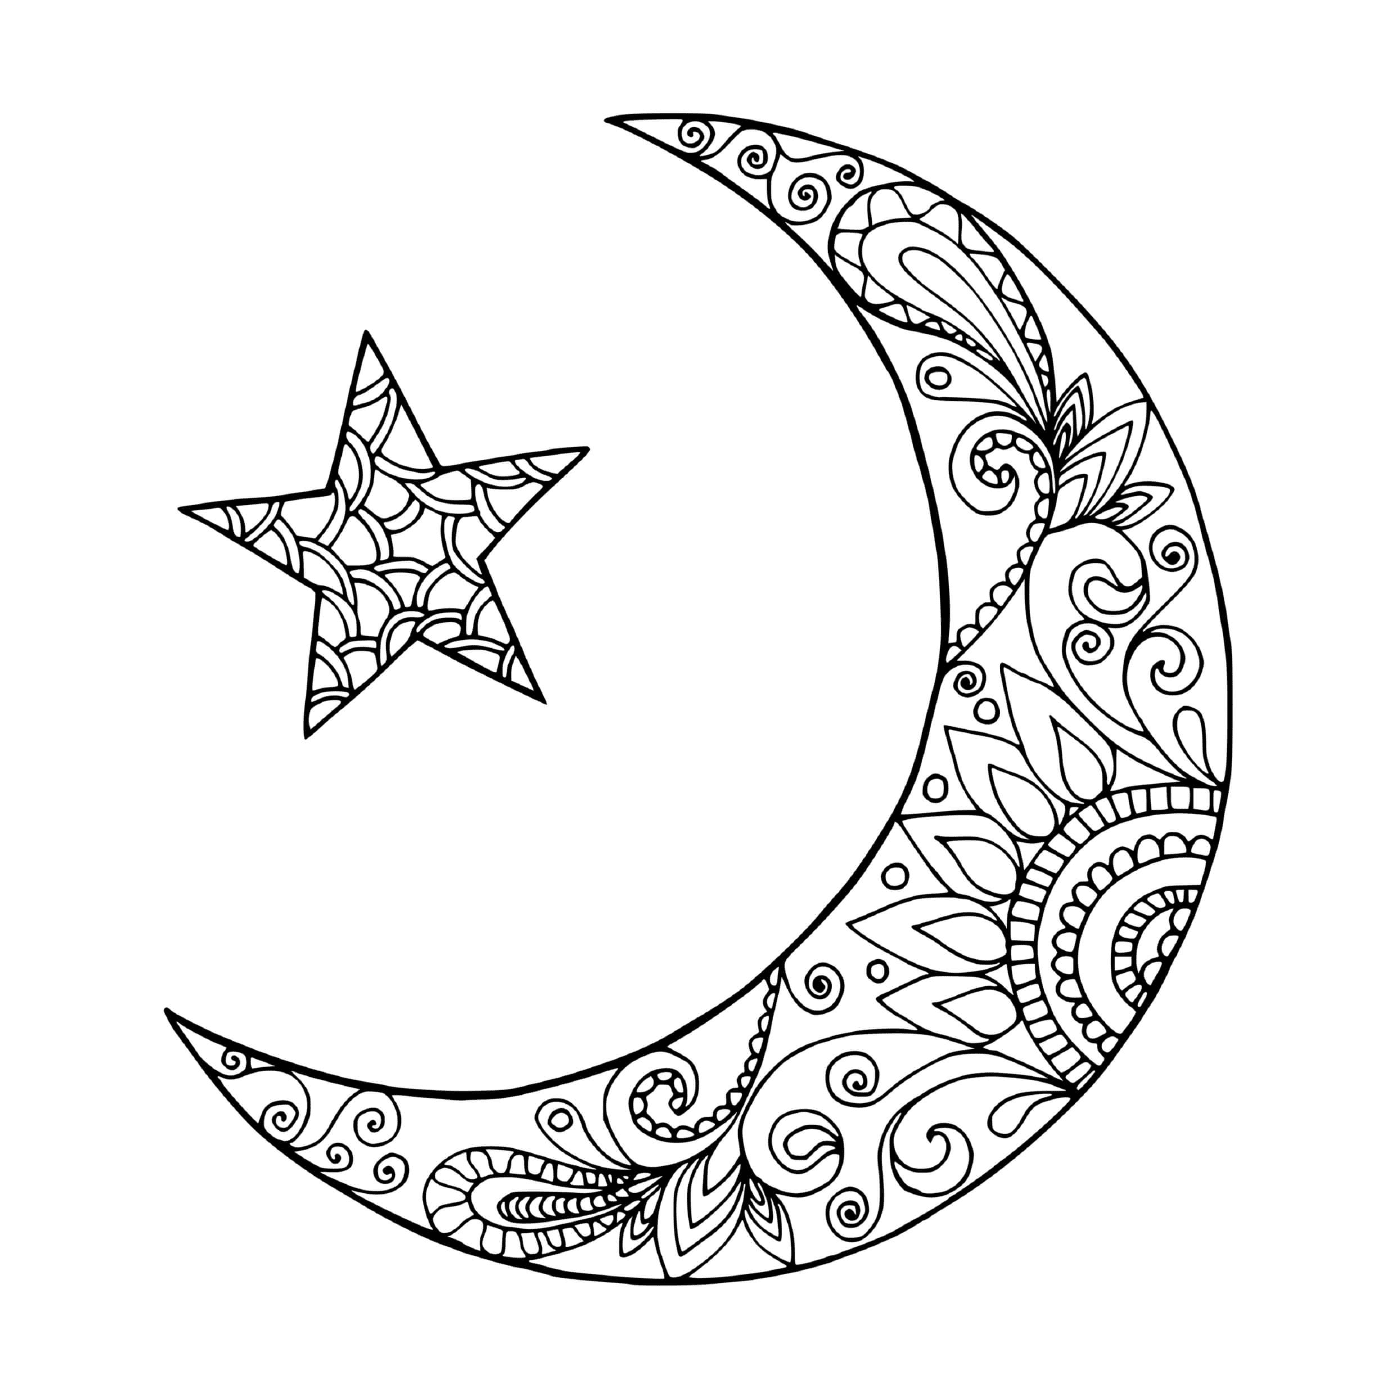  Moon in the shape of a crescent and star 